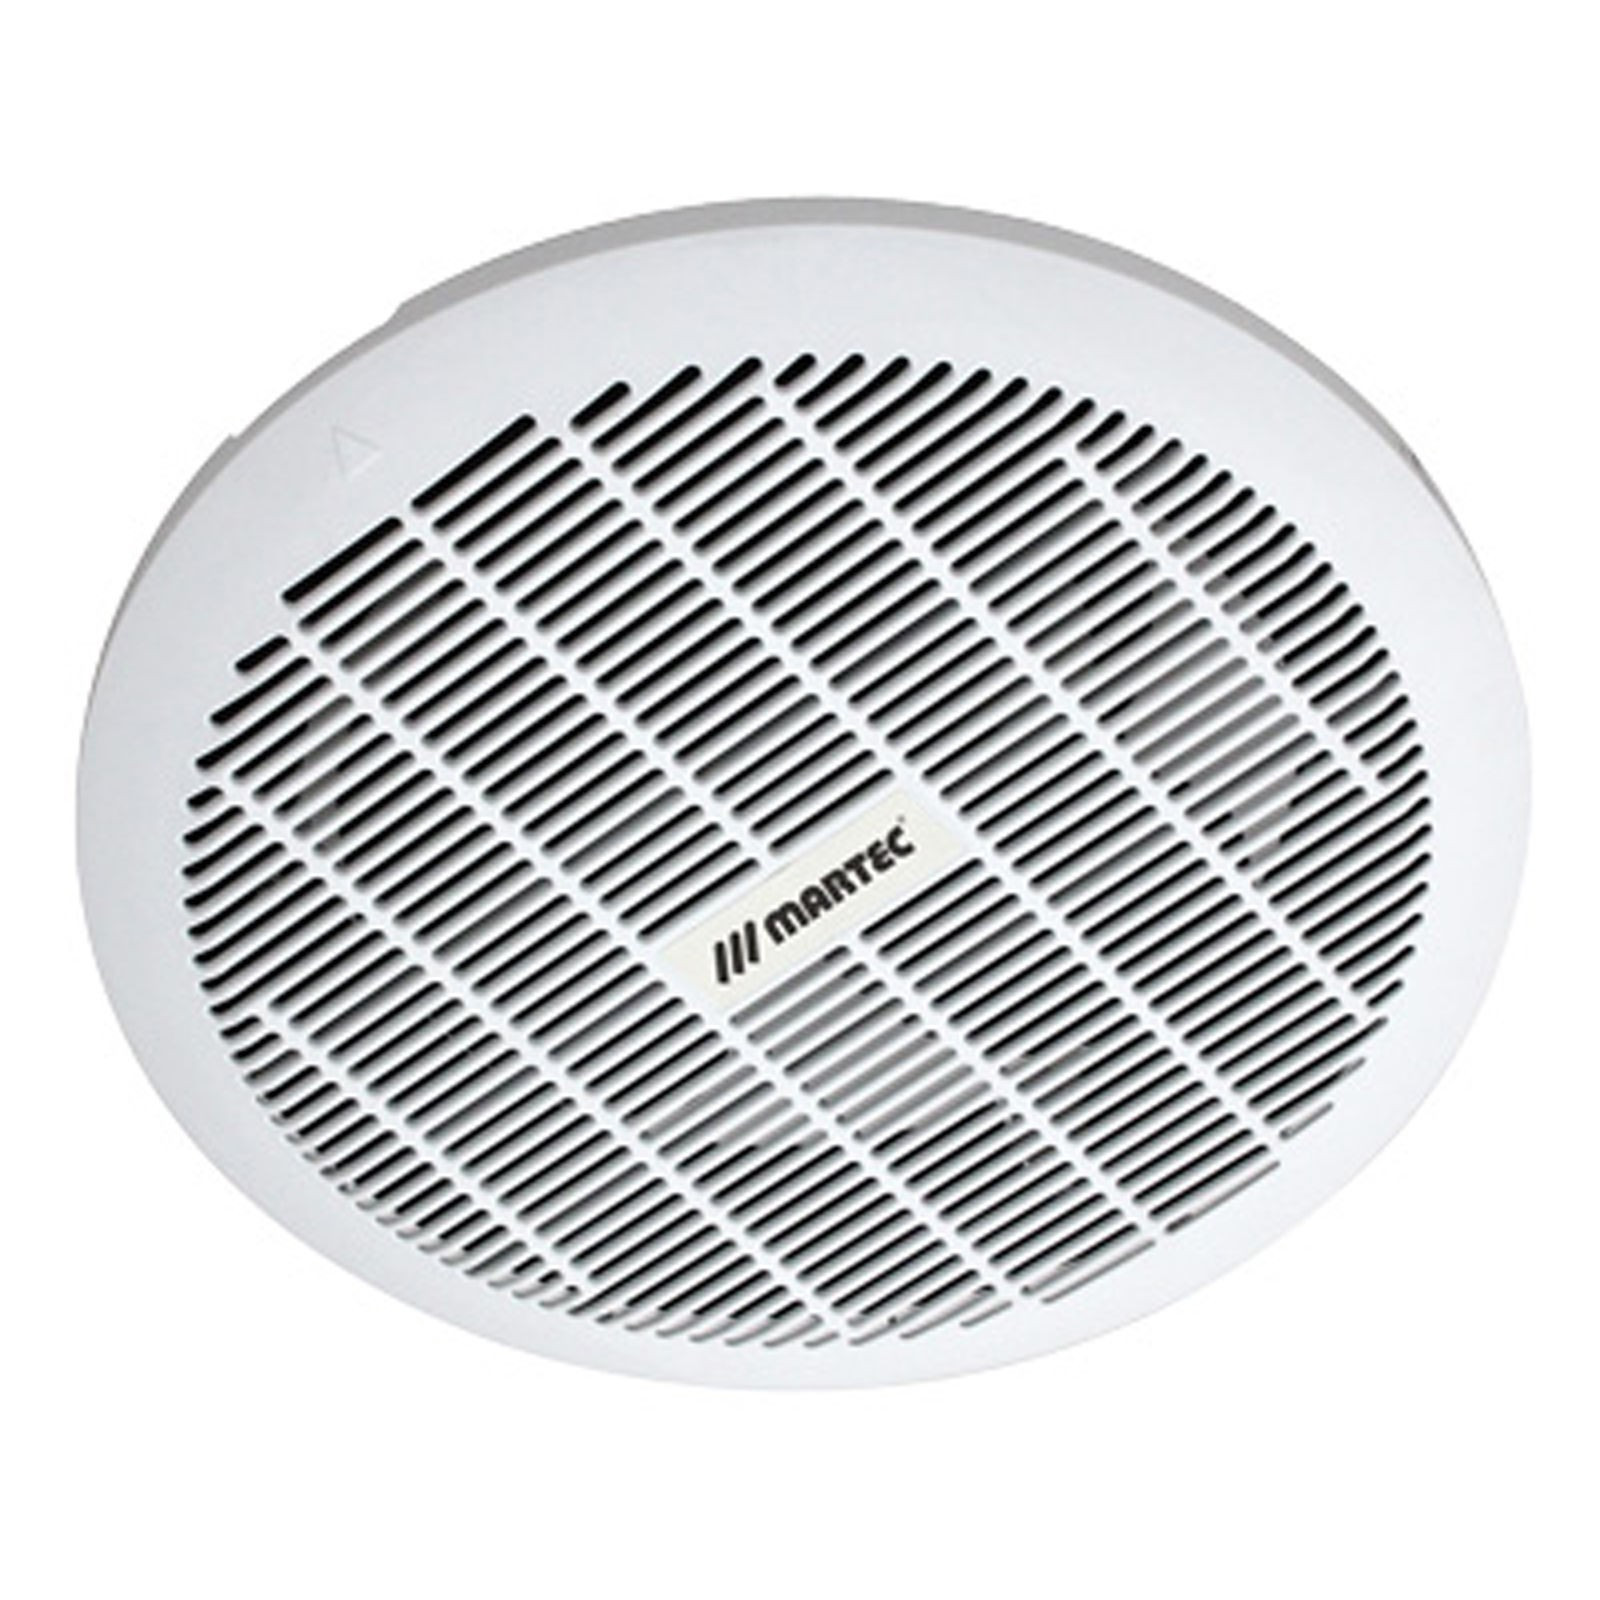 Bathroom Exhaust Fan Cover Replacement
 MARTEC CORE ROUND 250MM CEILING EXHAUST FAN – Cable Pro